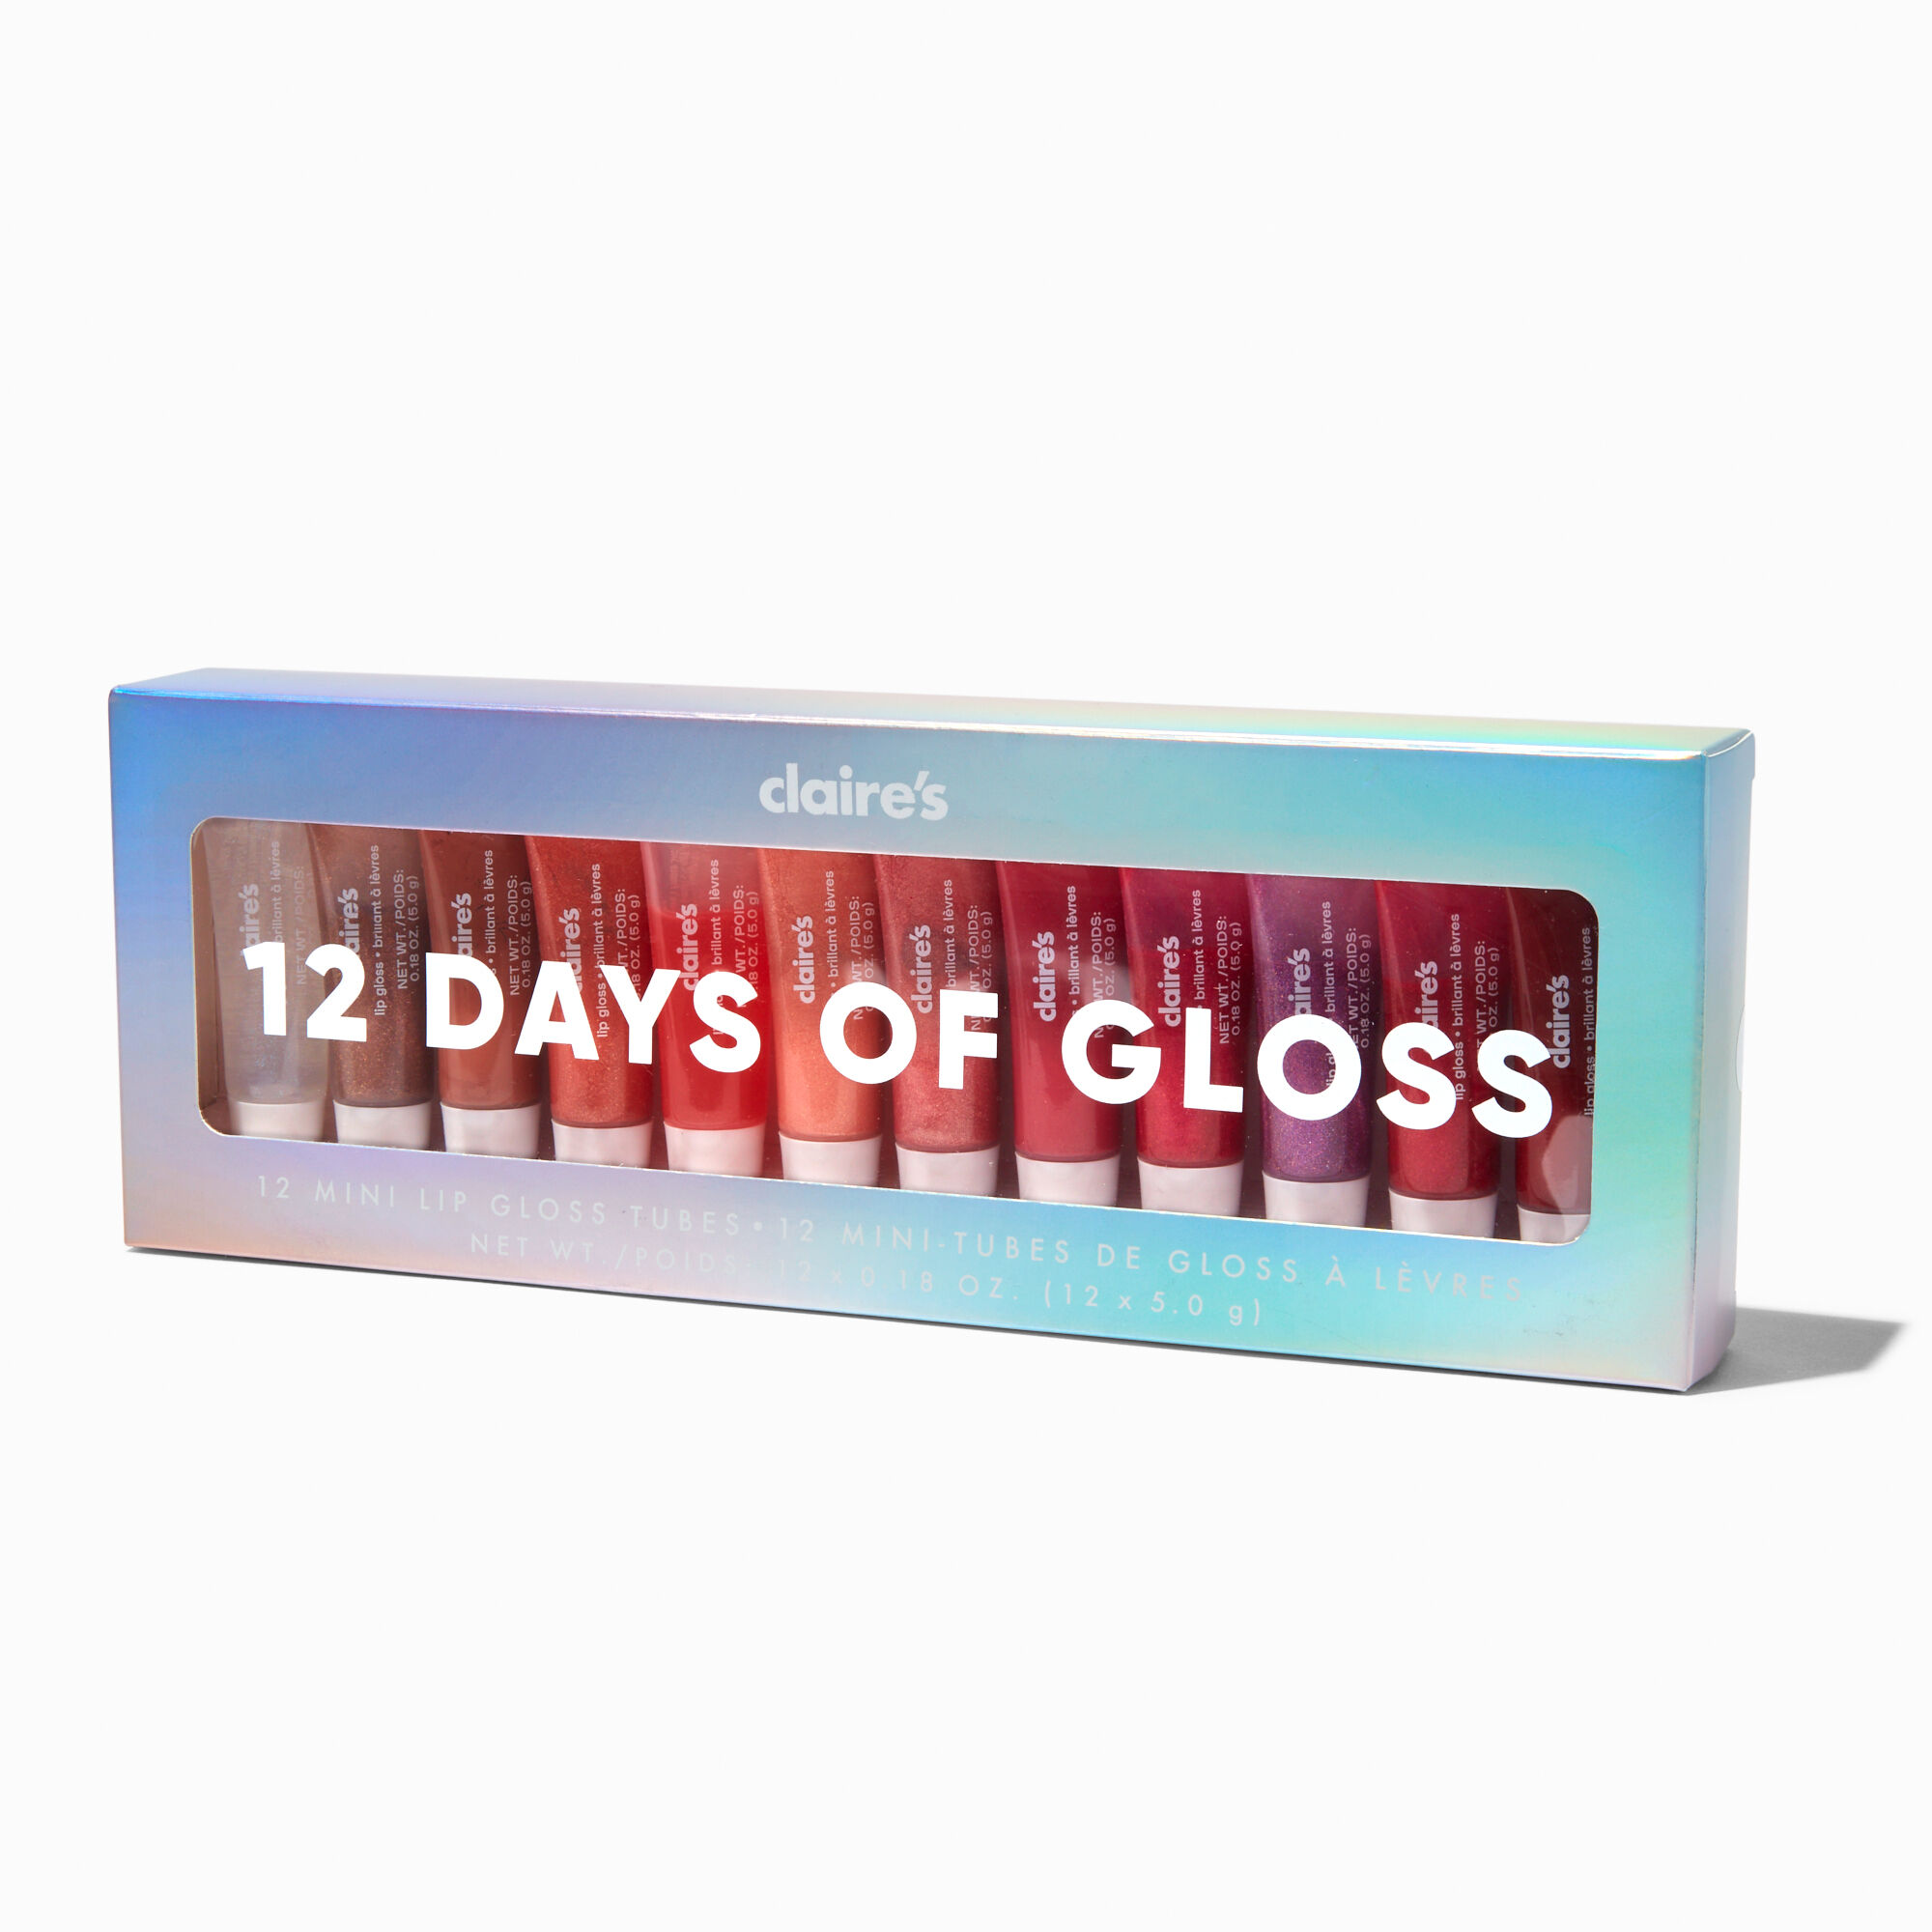 View Claires 12 Days Of Gloss Mini Lip Set Pack information